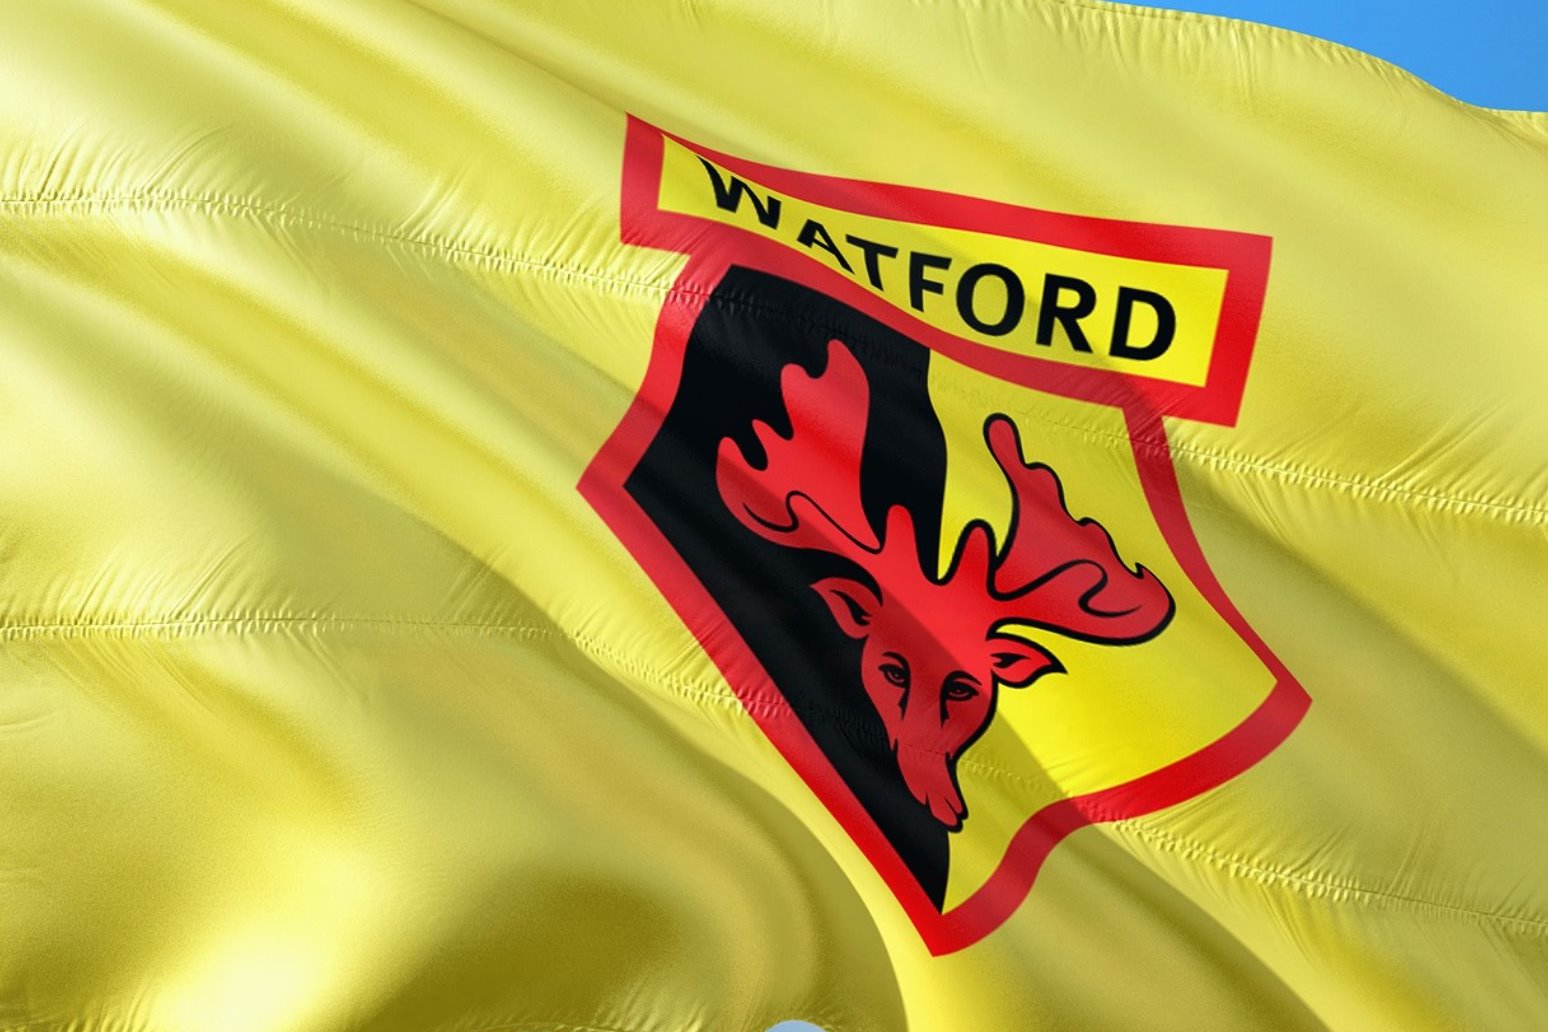 Watford secure dramatic comeback to reach FA Cup final 